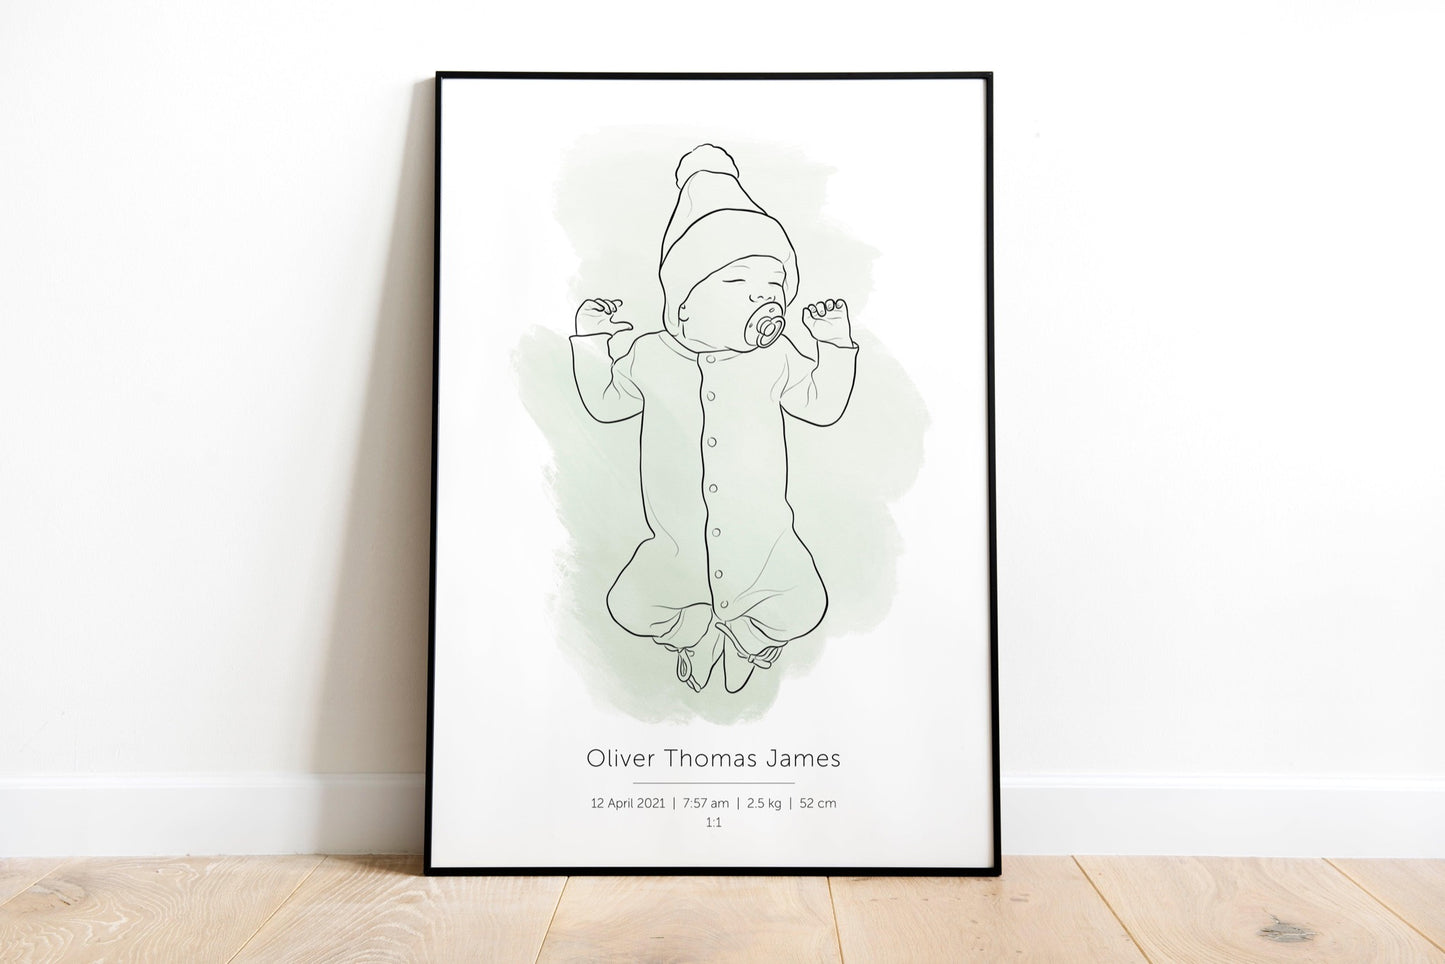 Custom made birth poster with watercolor wash in 1:1 scale with a detailed hand drawn portrait of the baby